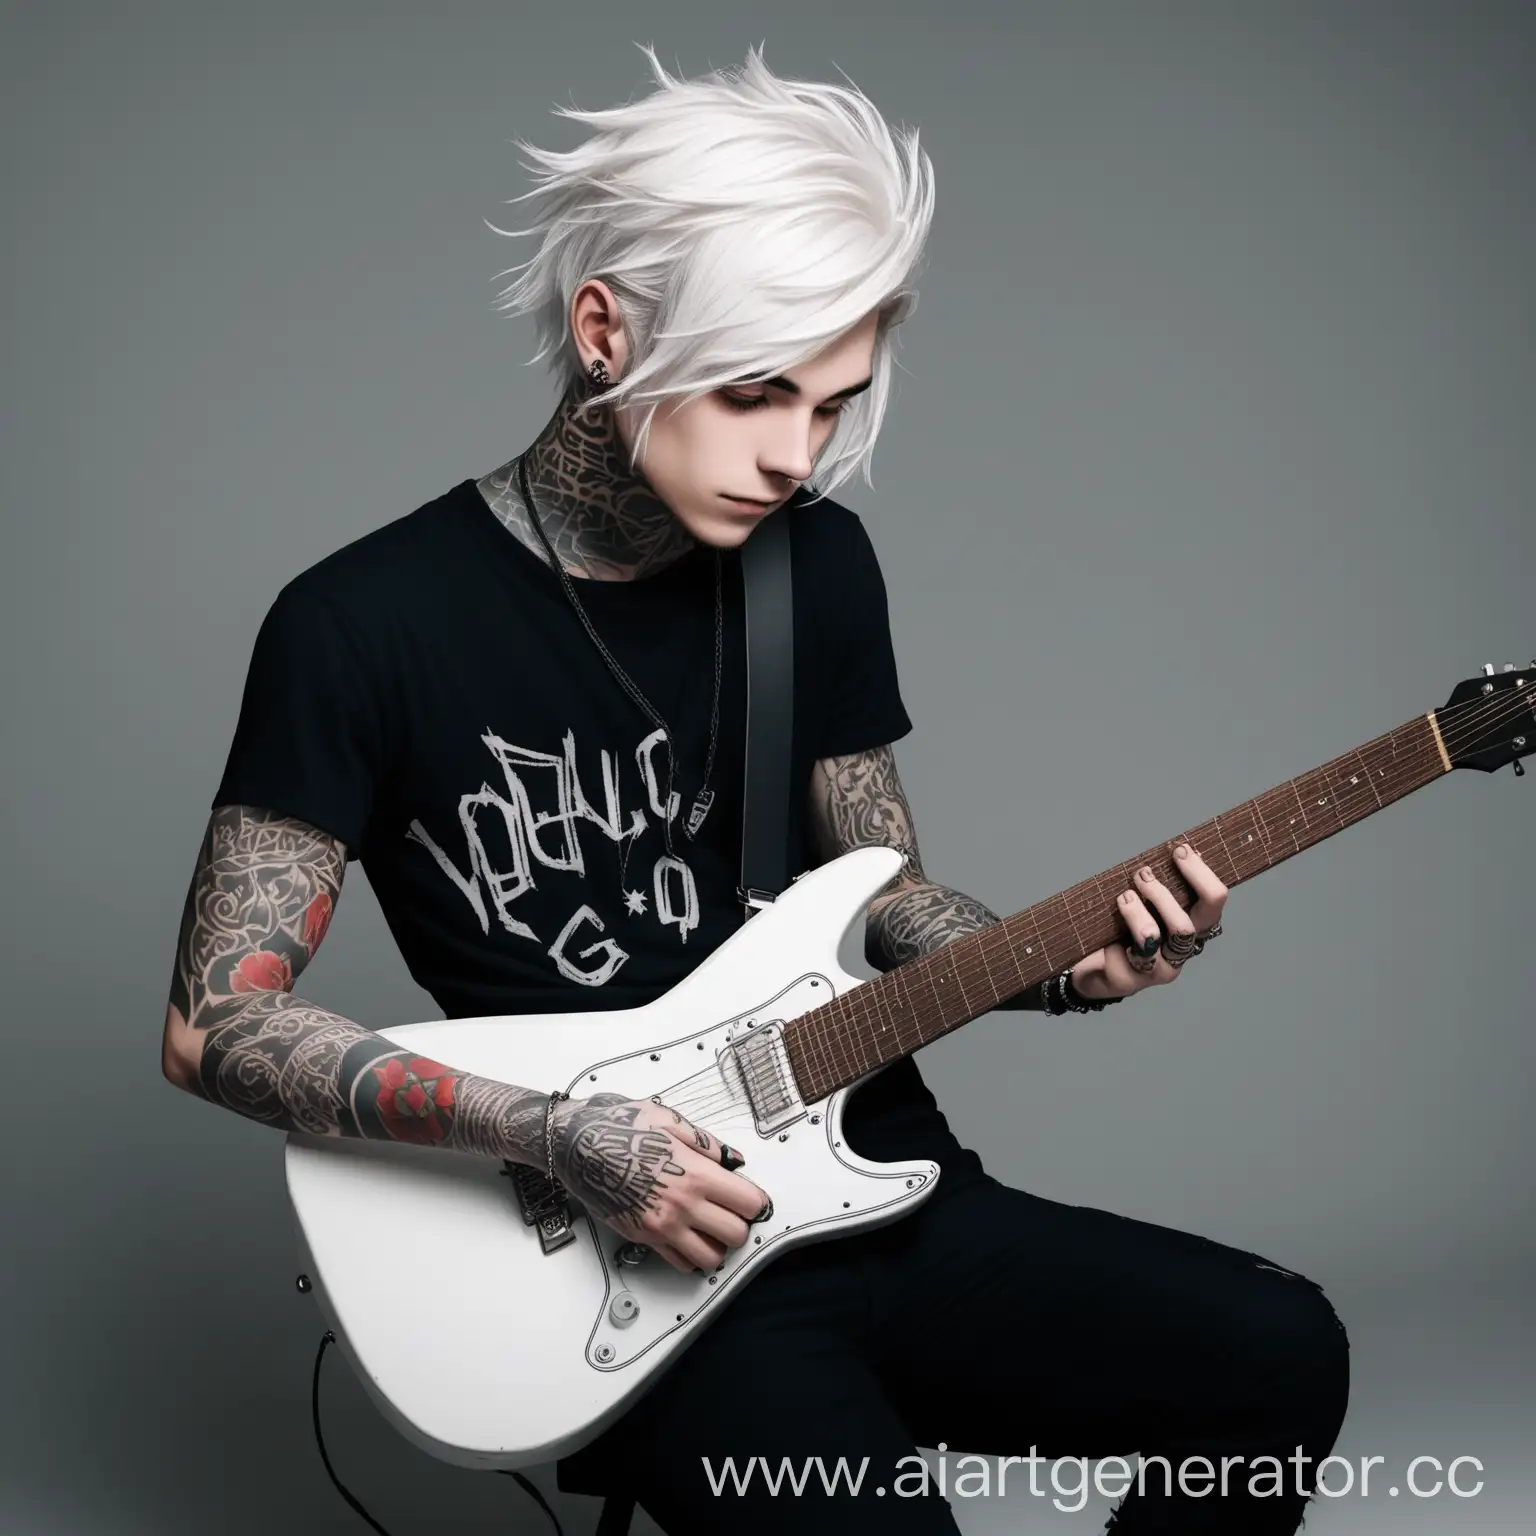 Tattooed-Guitarist-with-Unique-White-Hair